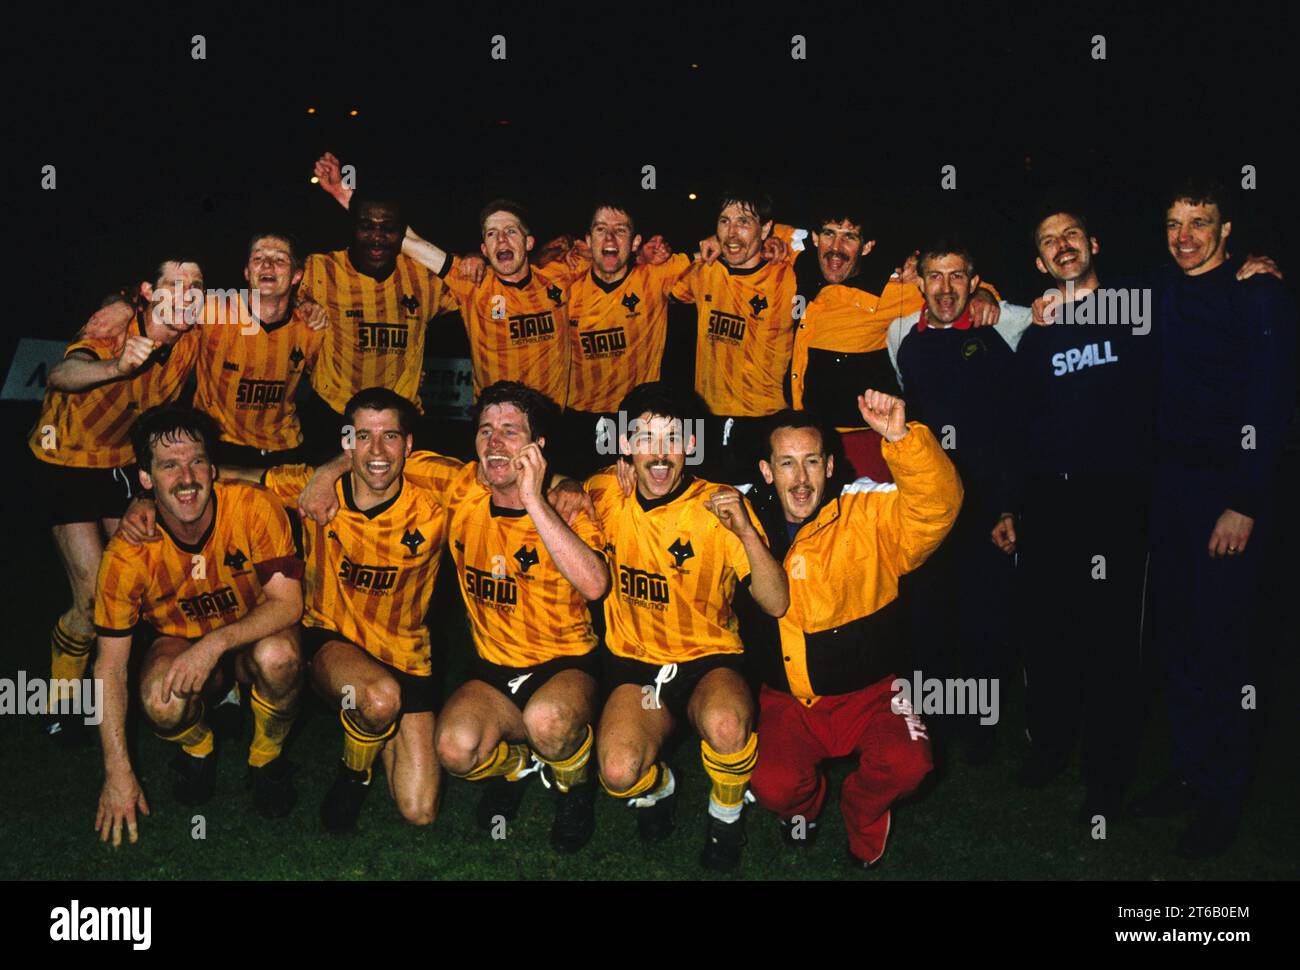 Promotion les loups célèbrent le 1988 mai. Front Alistair Robertson, Steve Bull, Micky Holmes, Andy Thompson, Nigel Vaughan. Derrière Andy Mutch, Keith Downing, Floyd Streete, Phil Robinson, Gary Bellamy, Jackie Gallagher, Barry Powell, Paul Darby, Graham Turner. Banque D'Images